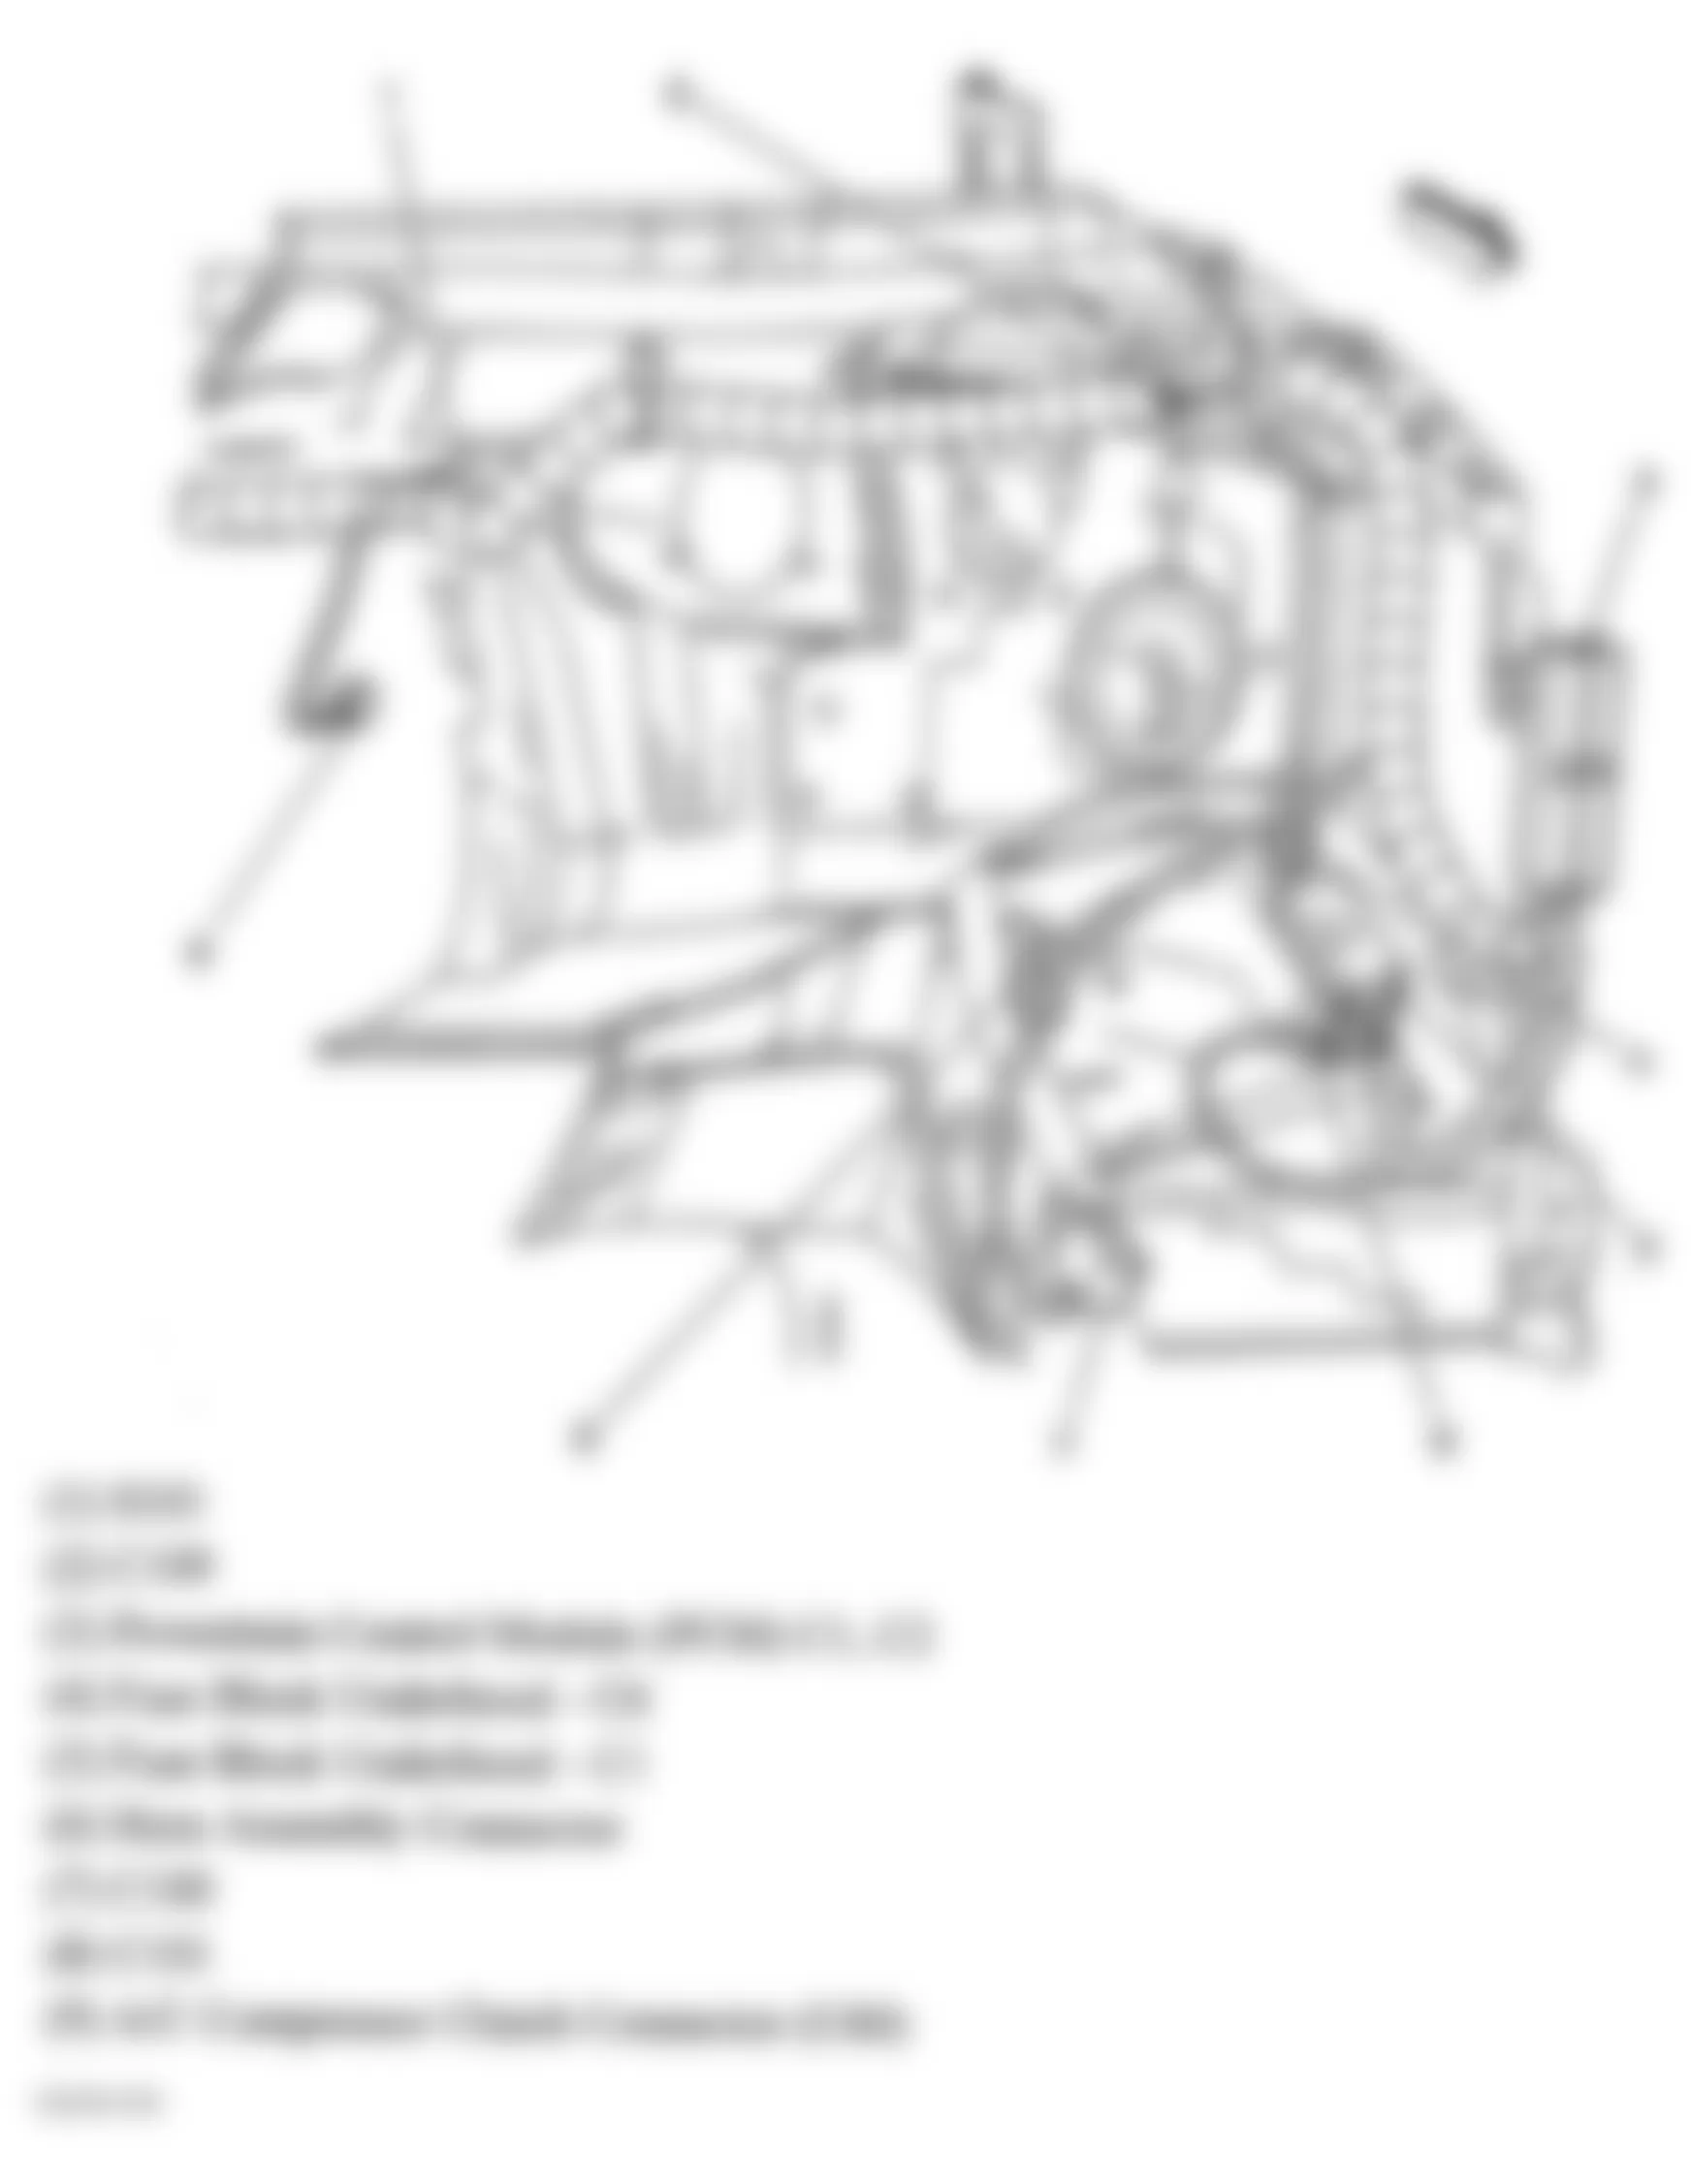 GMC Savana G2500 2004 - Component Locations -  Left Rear Of Engine Compartment